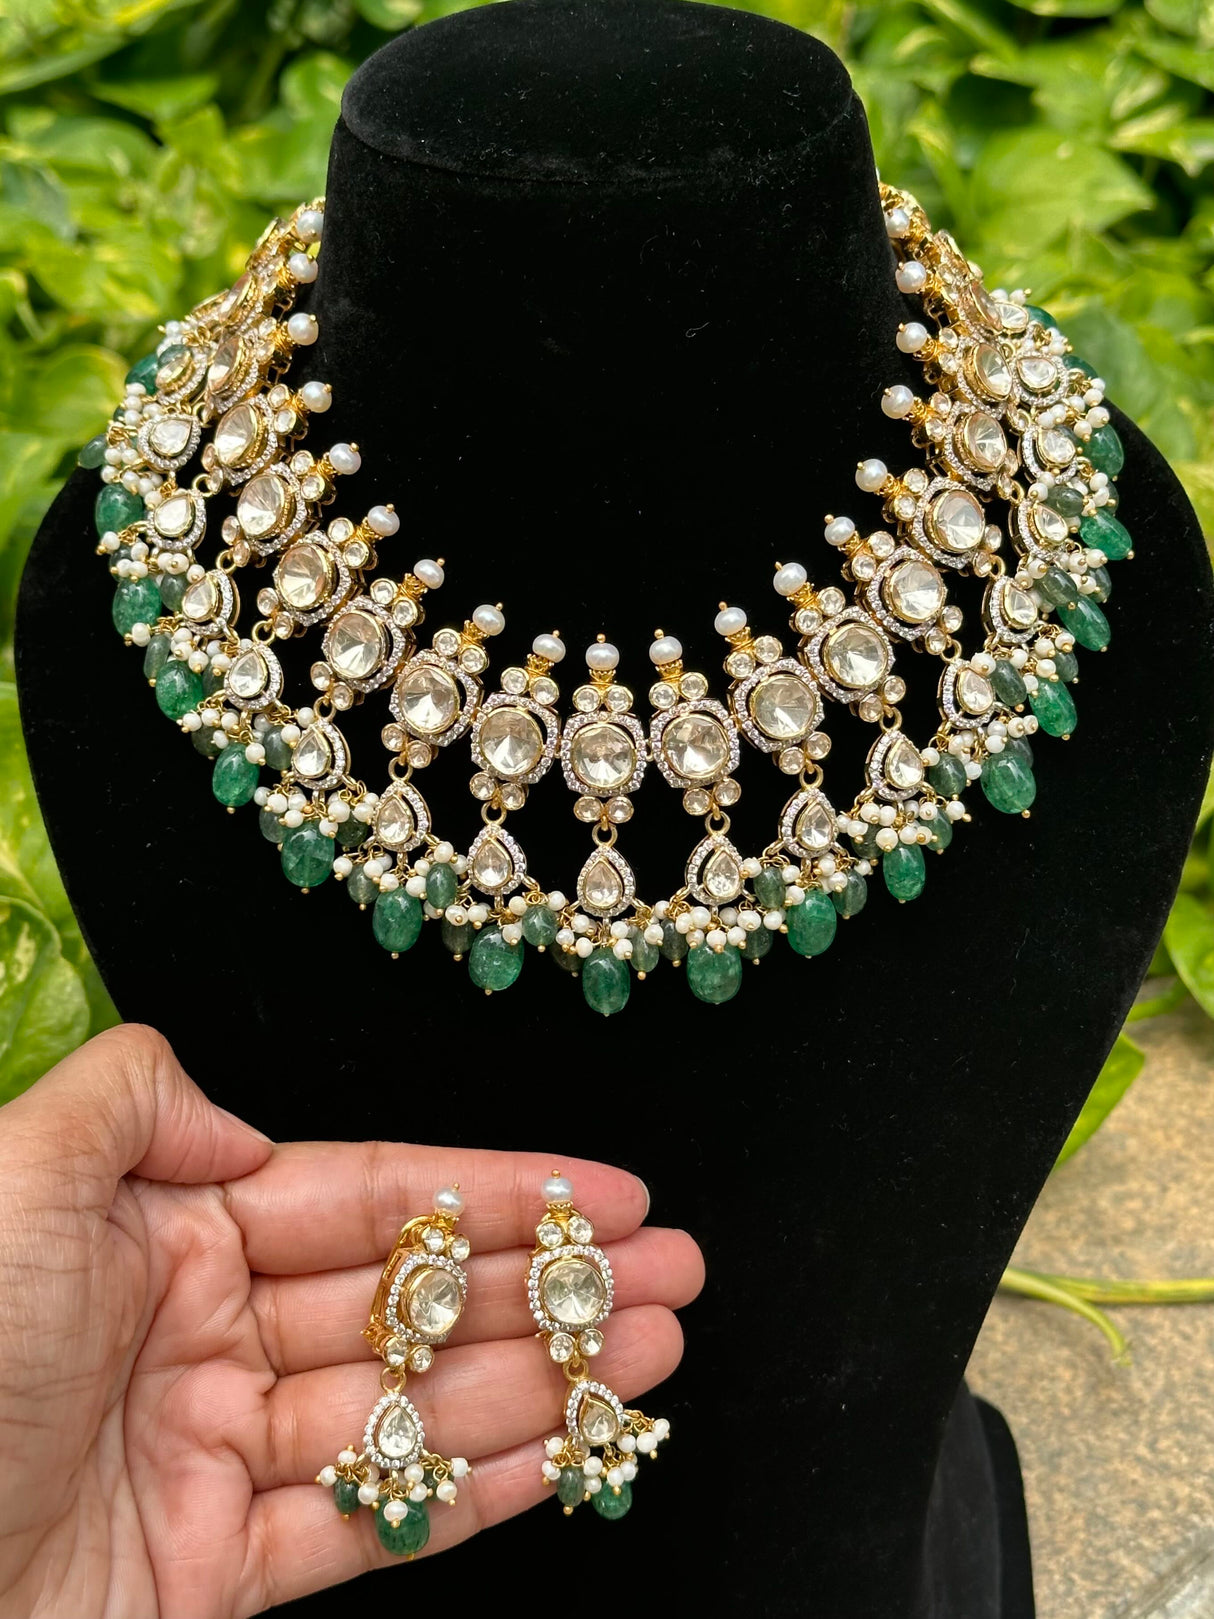 Handcrafted 92.5 Silver Statement Necklace with Earrings